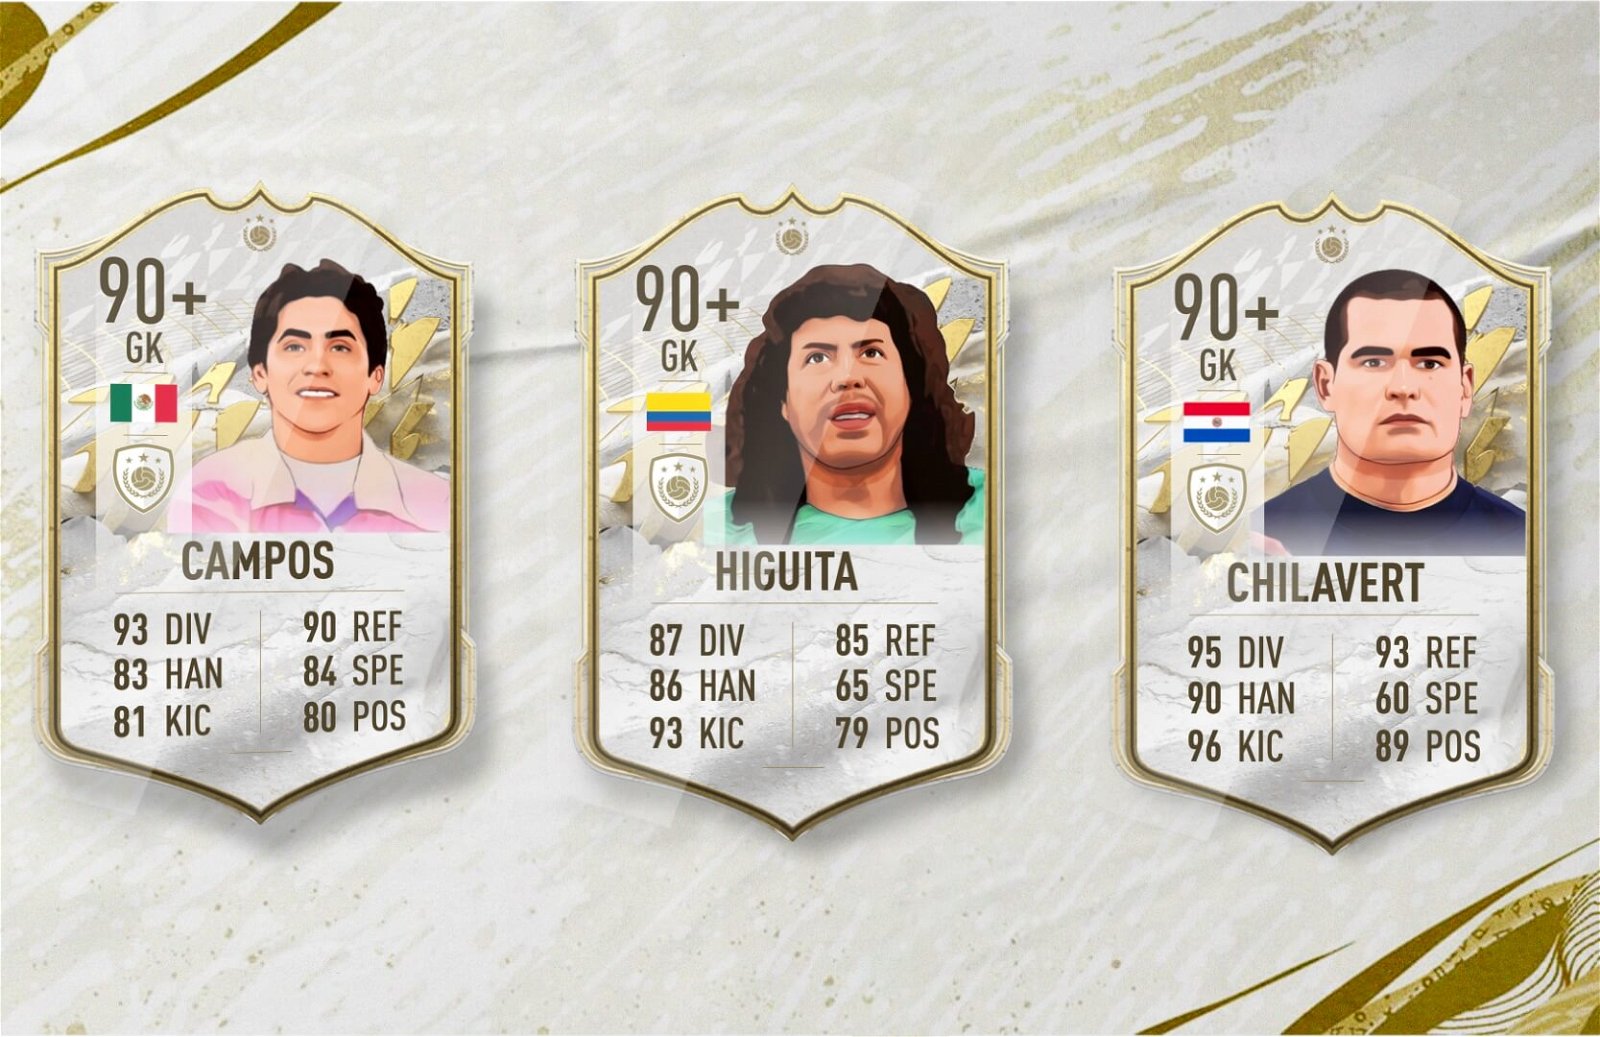 Illustrations of football goalkeepers Campos, Higuita, and Chilavert in video game cards.